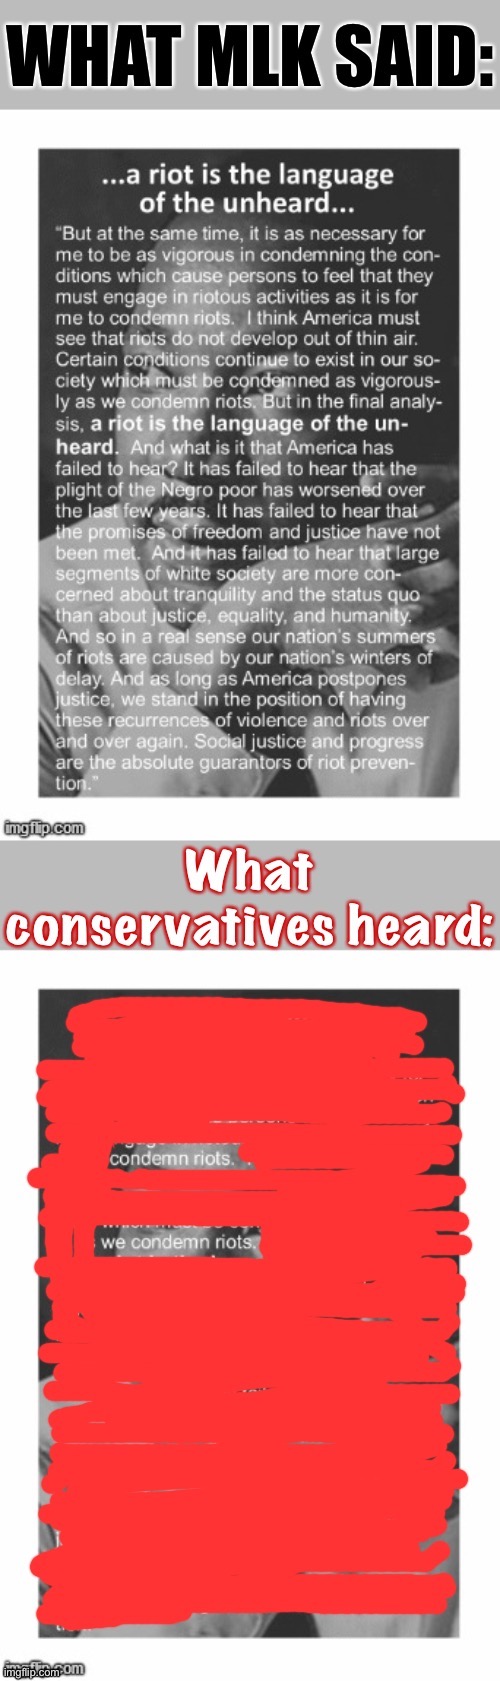 Re-cringe! | image tagged in mlk quote riots conservative logic | made w/ Imgflip meme maker